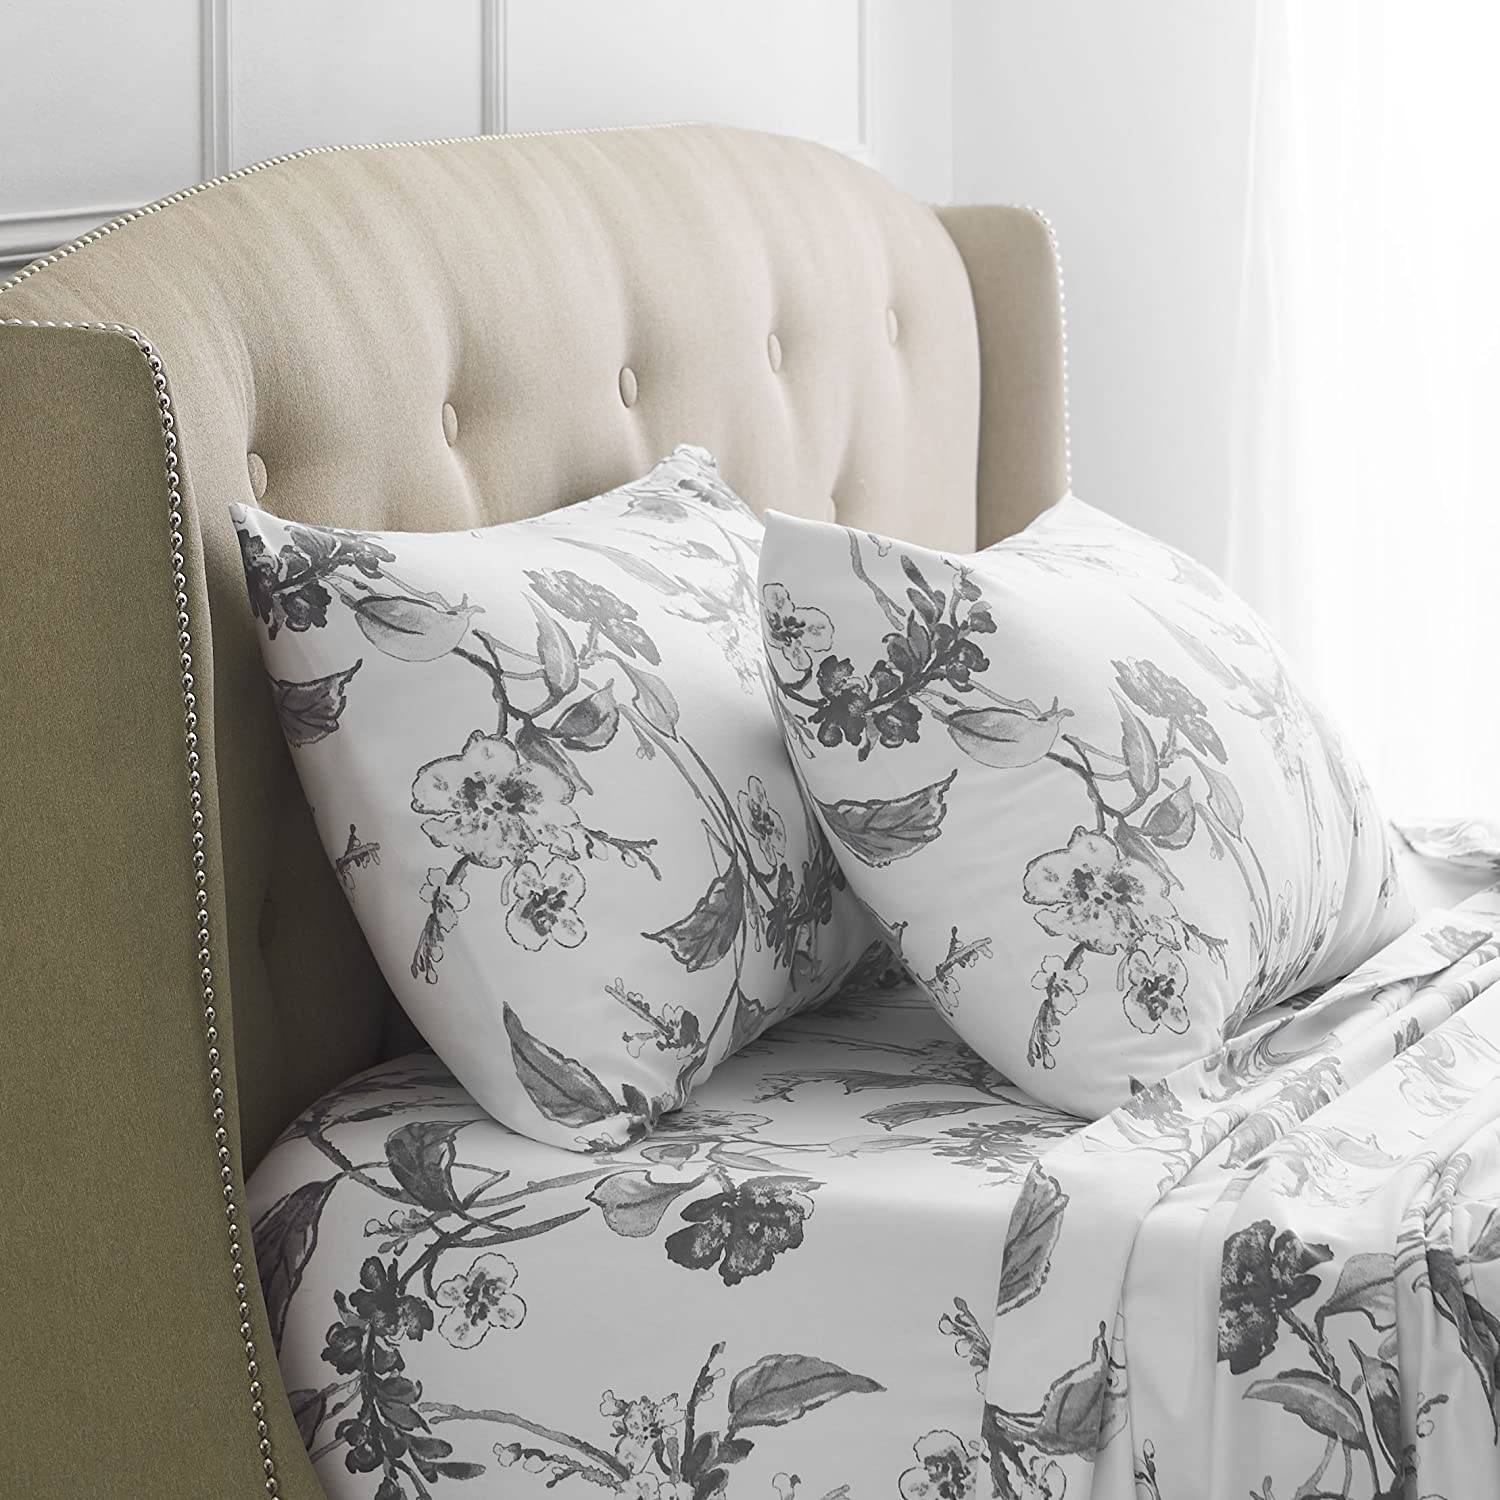 Grey floral printed pillow case and bed sheets